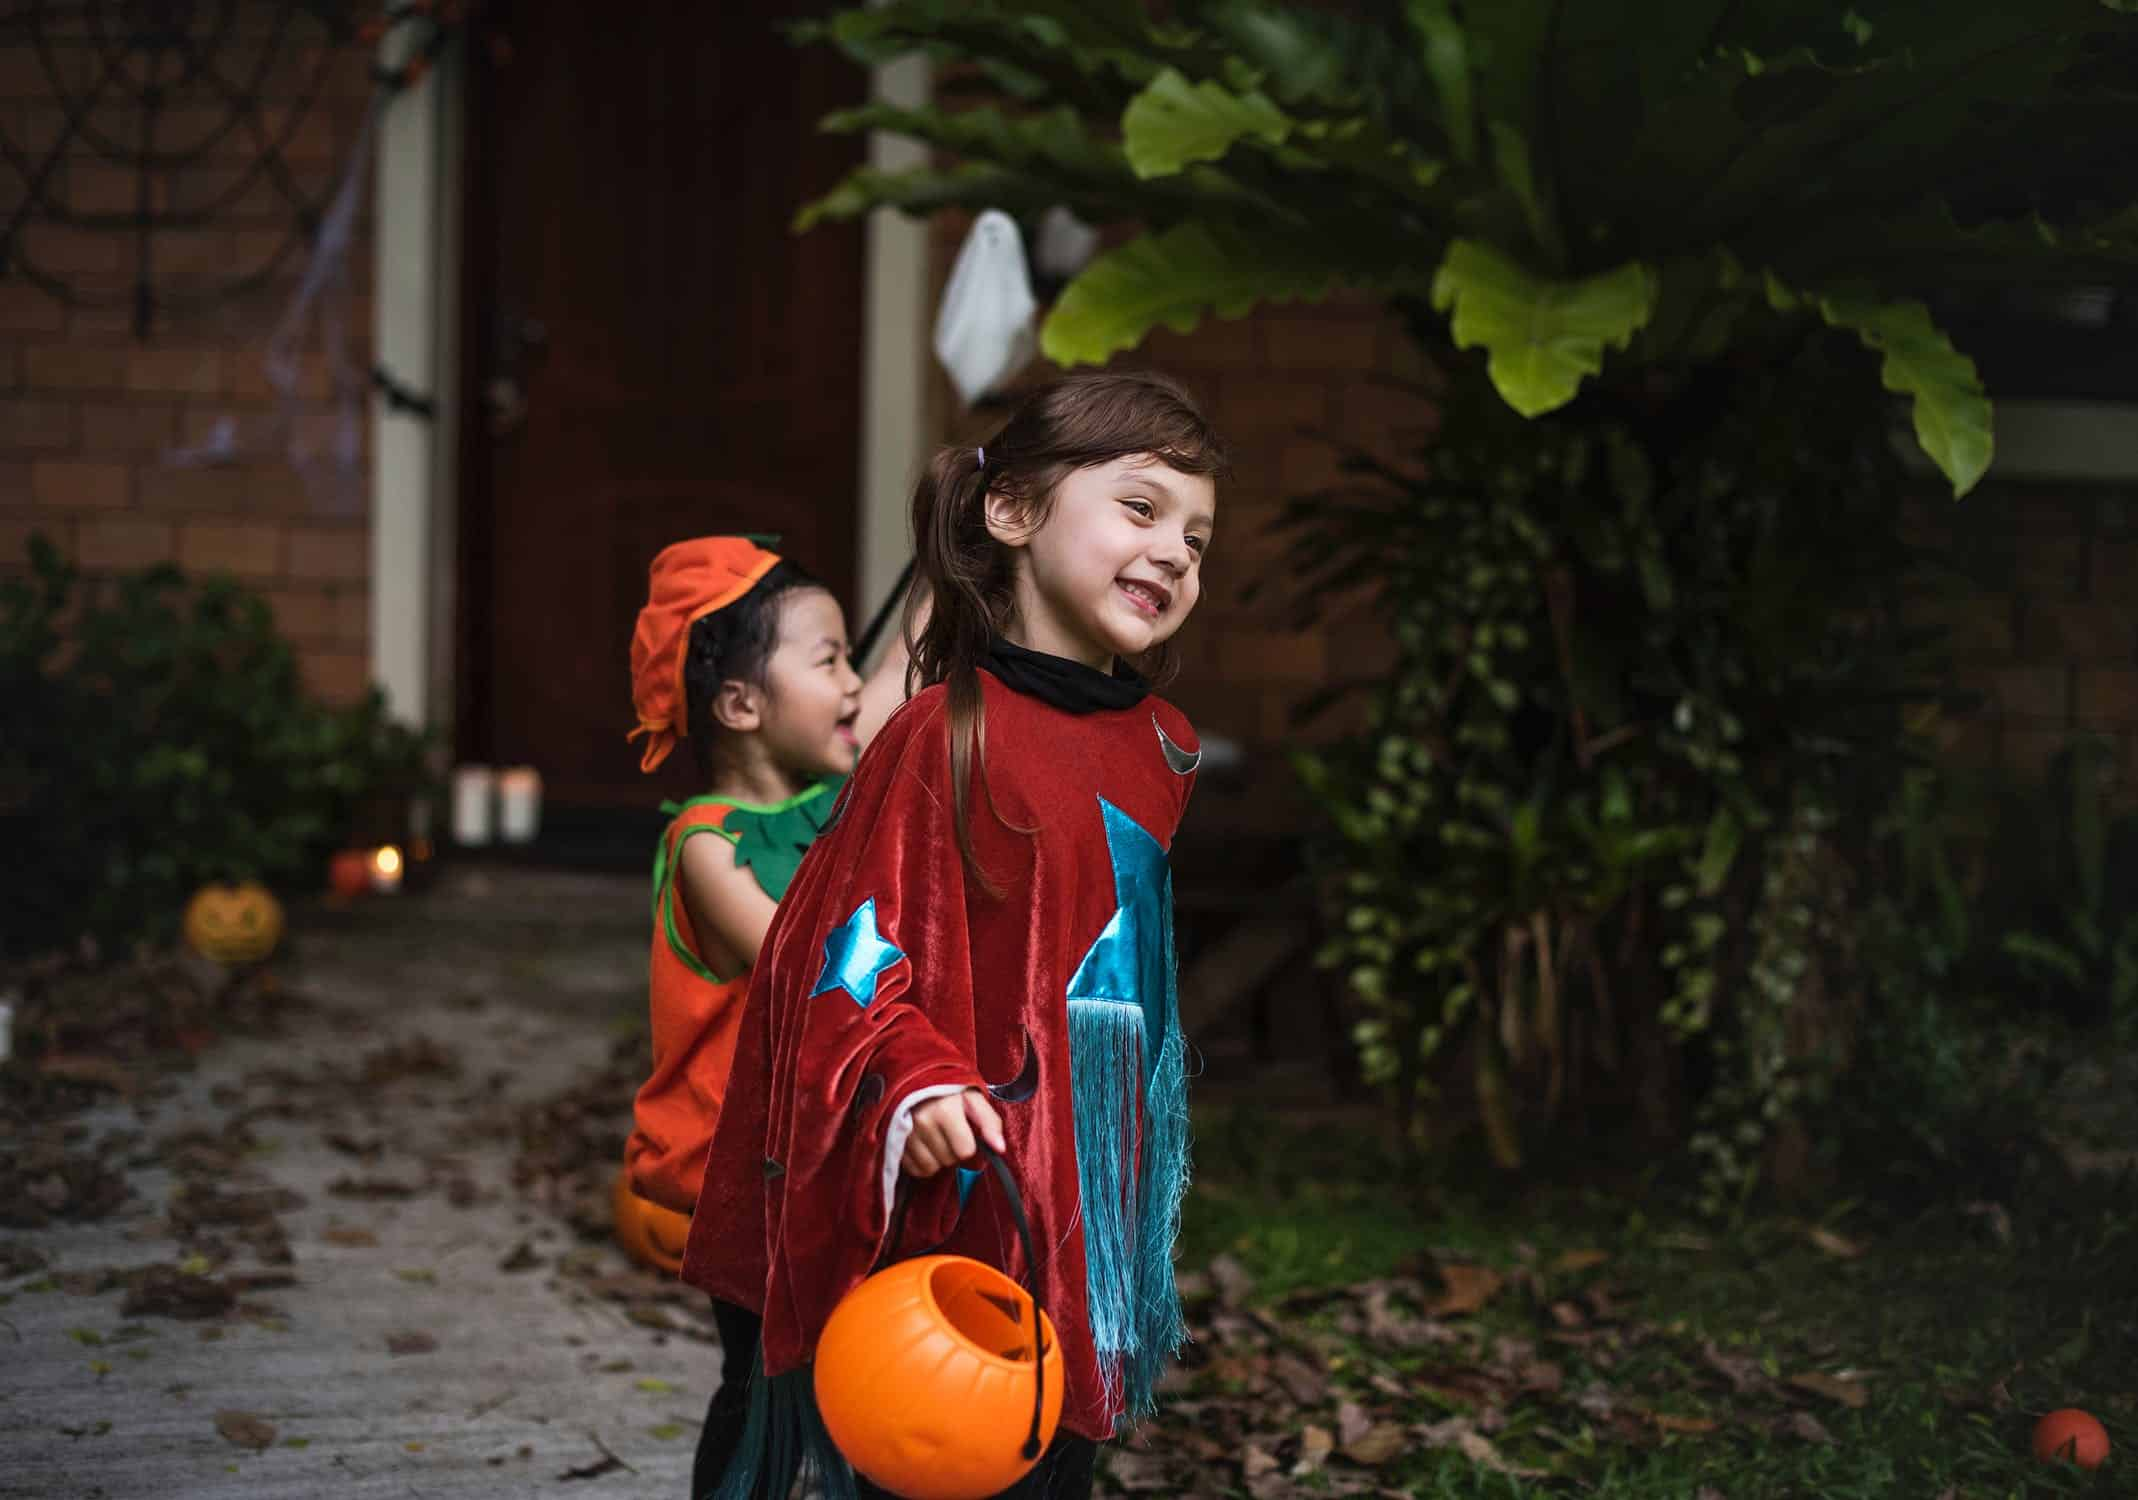 Image related to How to Keep Your Children Safe on Halloween